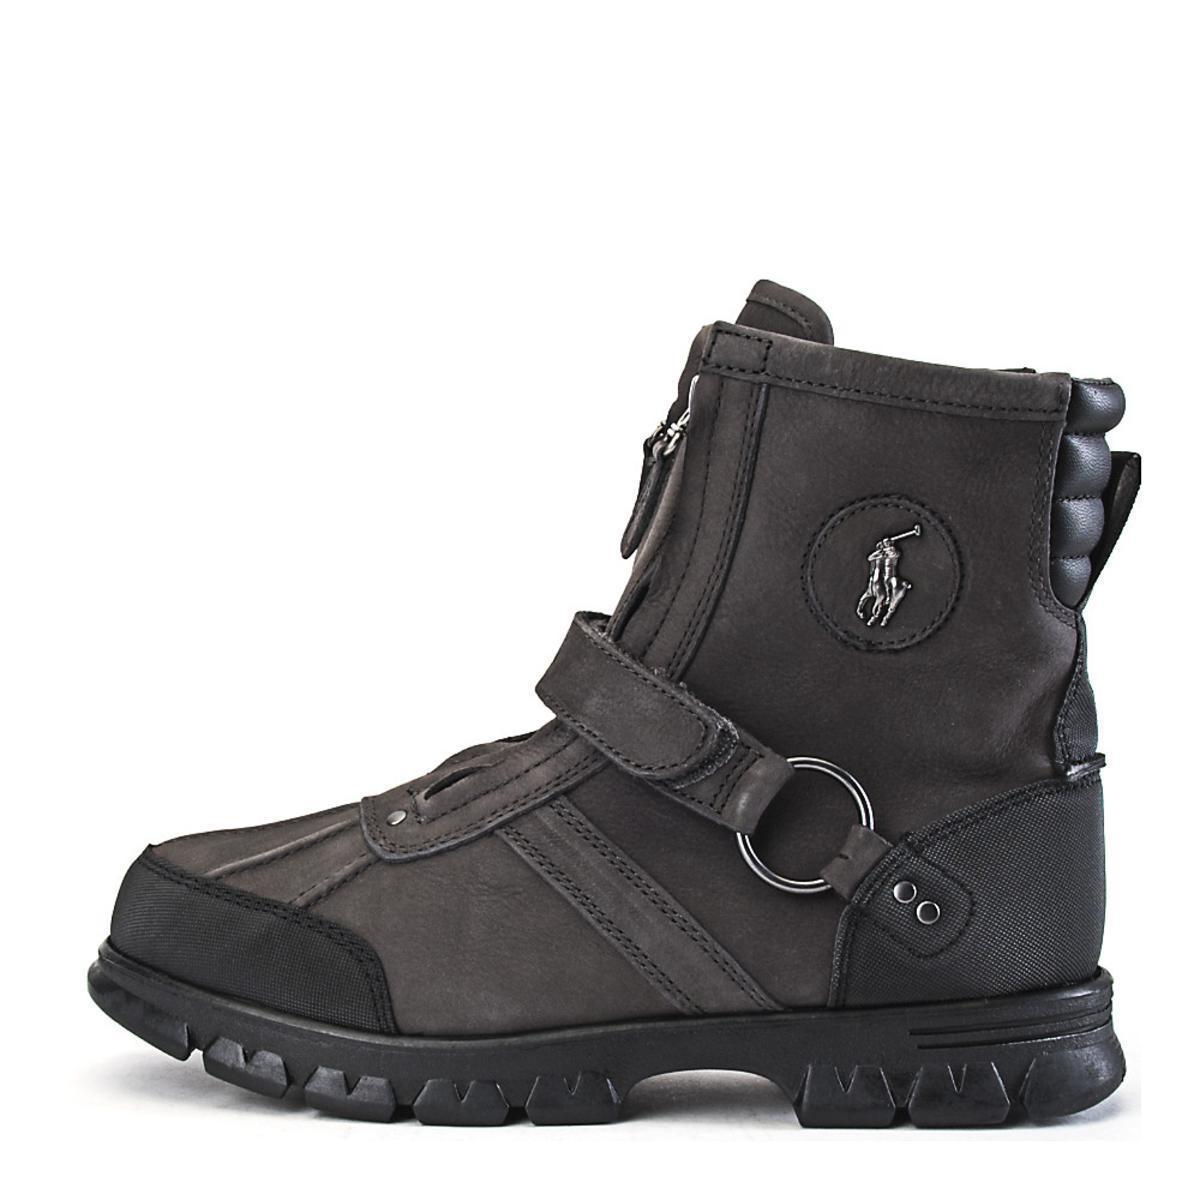 Polo Ralph Lauren GRAY Casual Rugged Boot Conquest Iii 